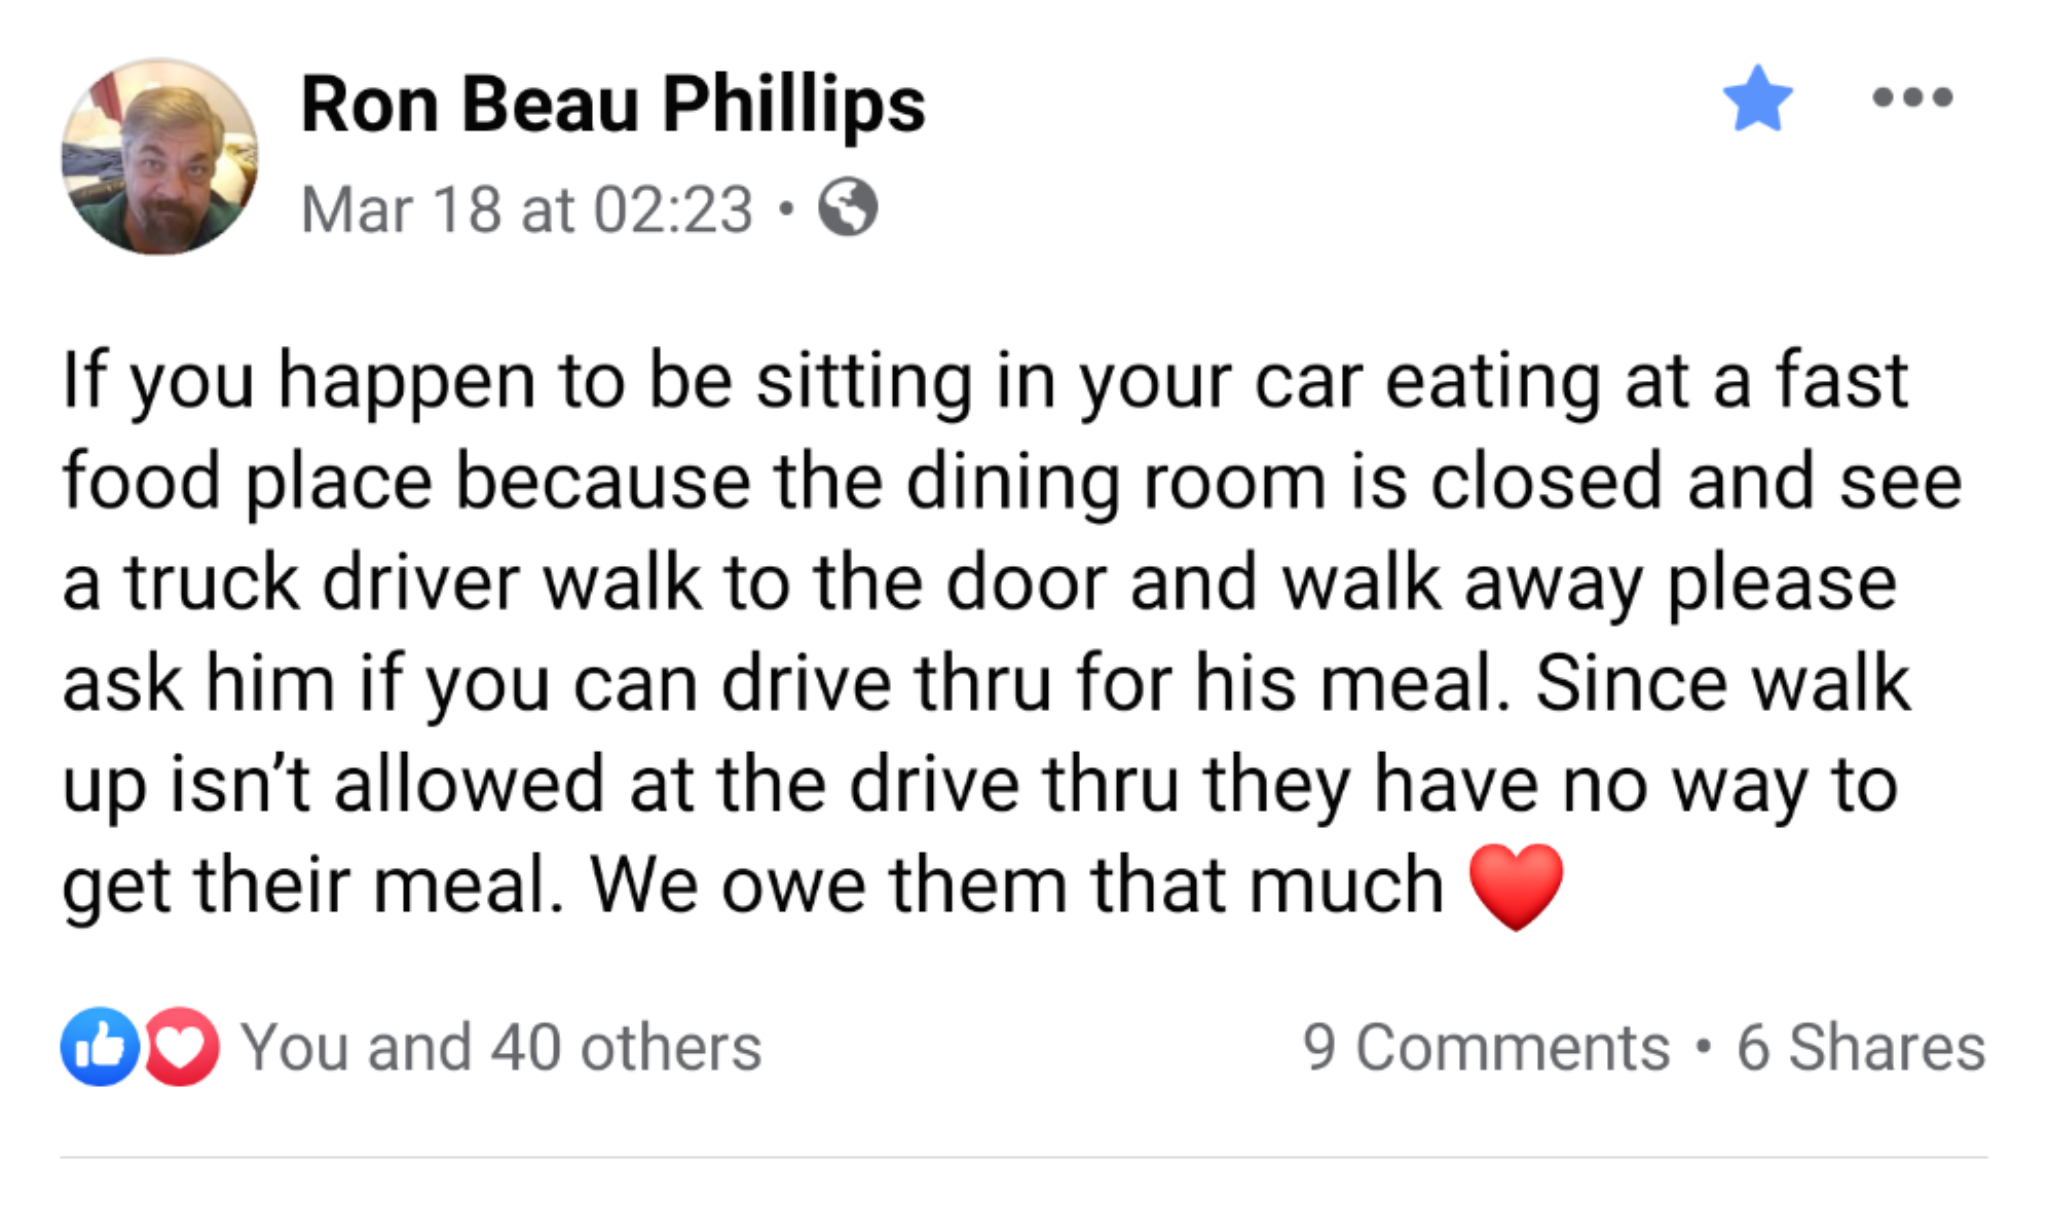 document - Ron Beau Phillips Mar 18 at If you happen to be sitting in your car eating at a fast food place because the dining room is closed and see a truck driver walk to the door and walk away please ask him if you can drive thru for his meal. Since wal